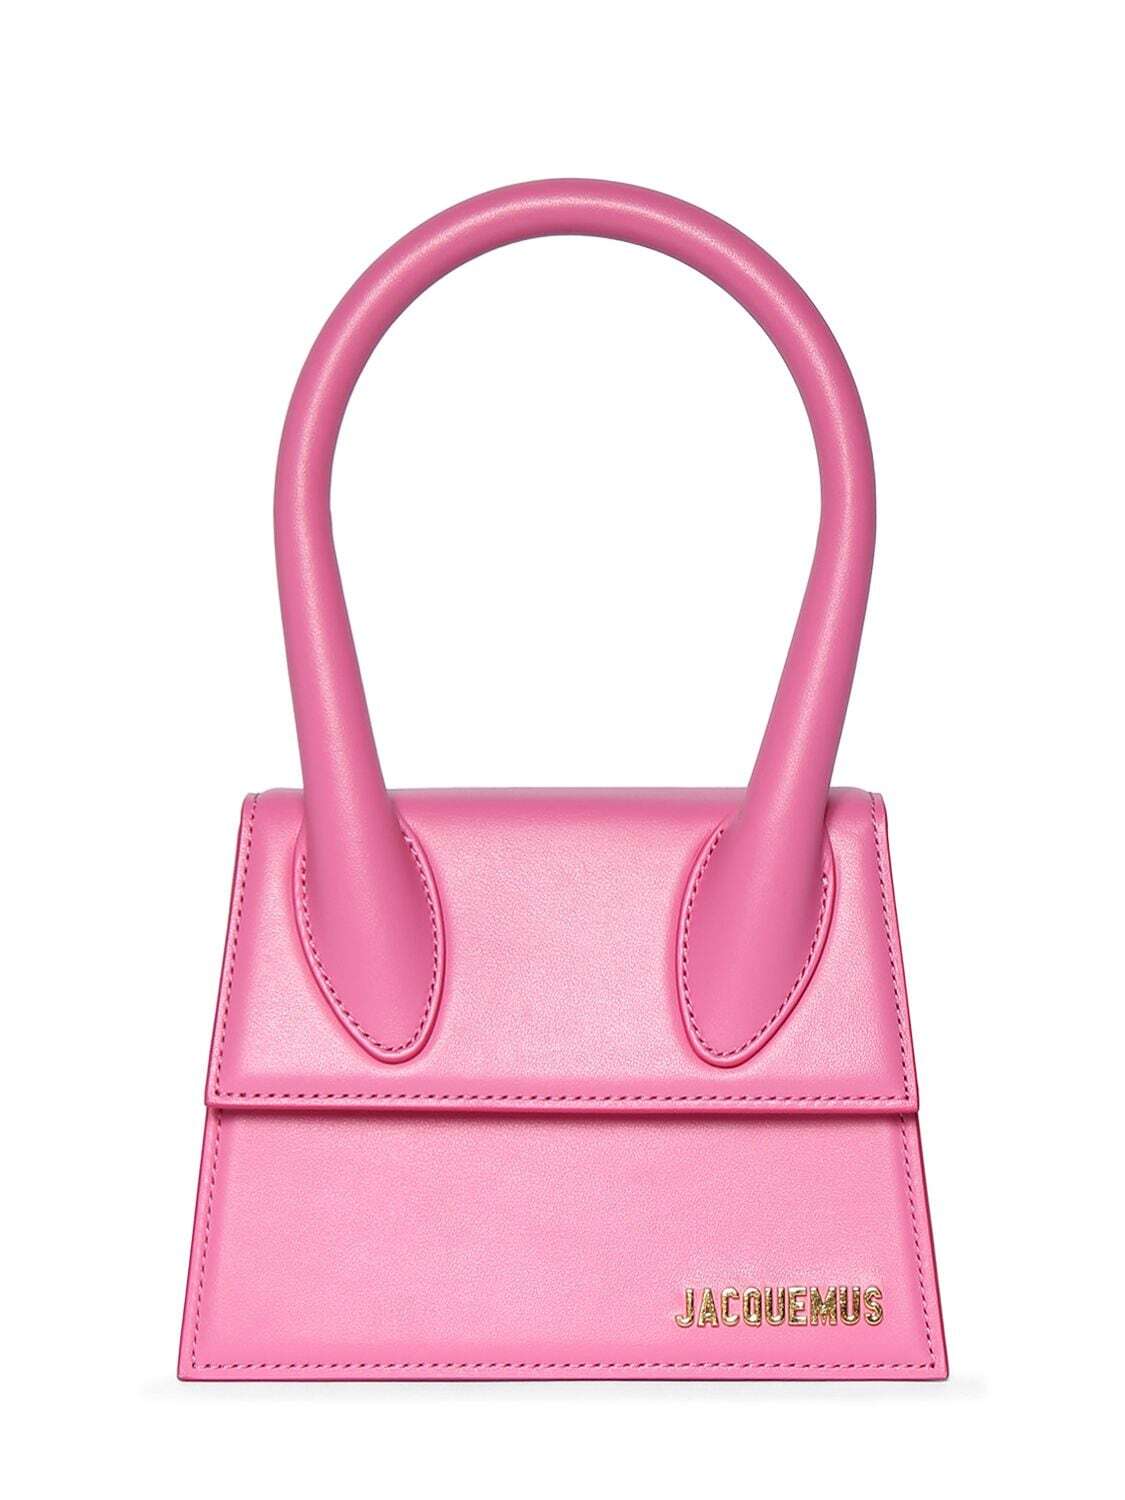 JACQUEMUS Le Chiquito Leather Top Handle Bag in pink